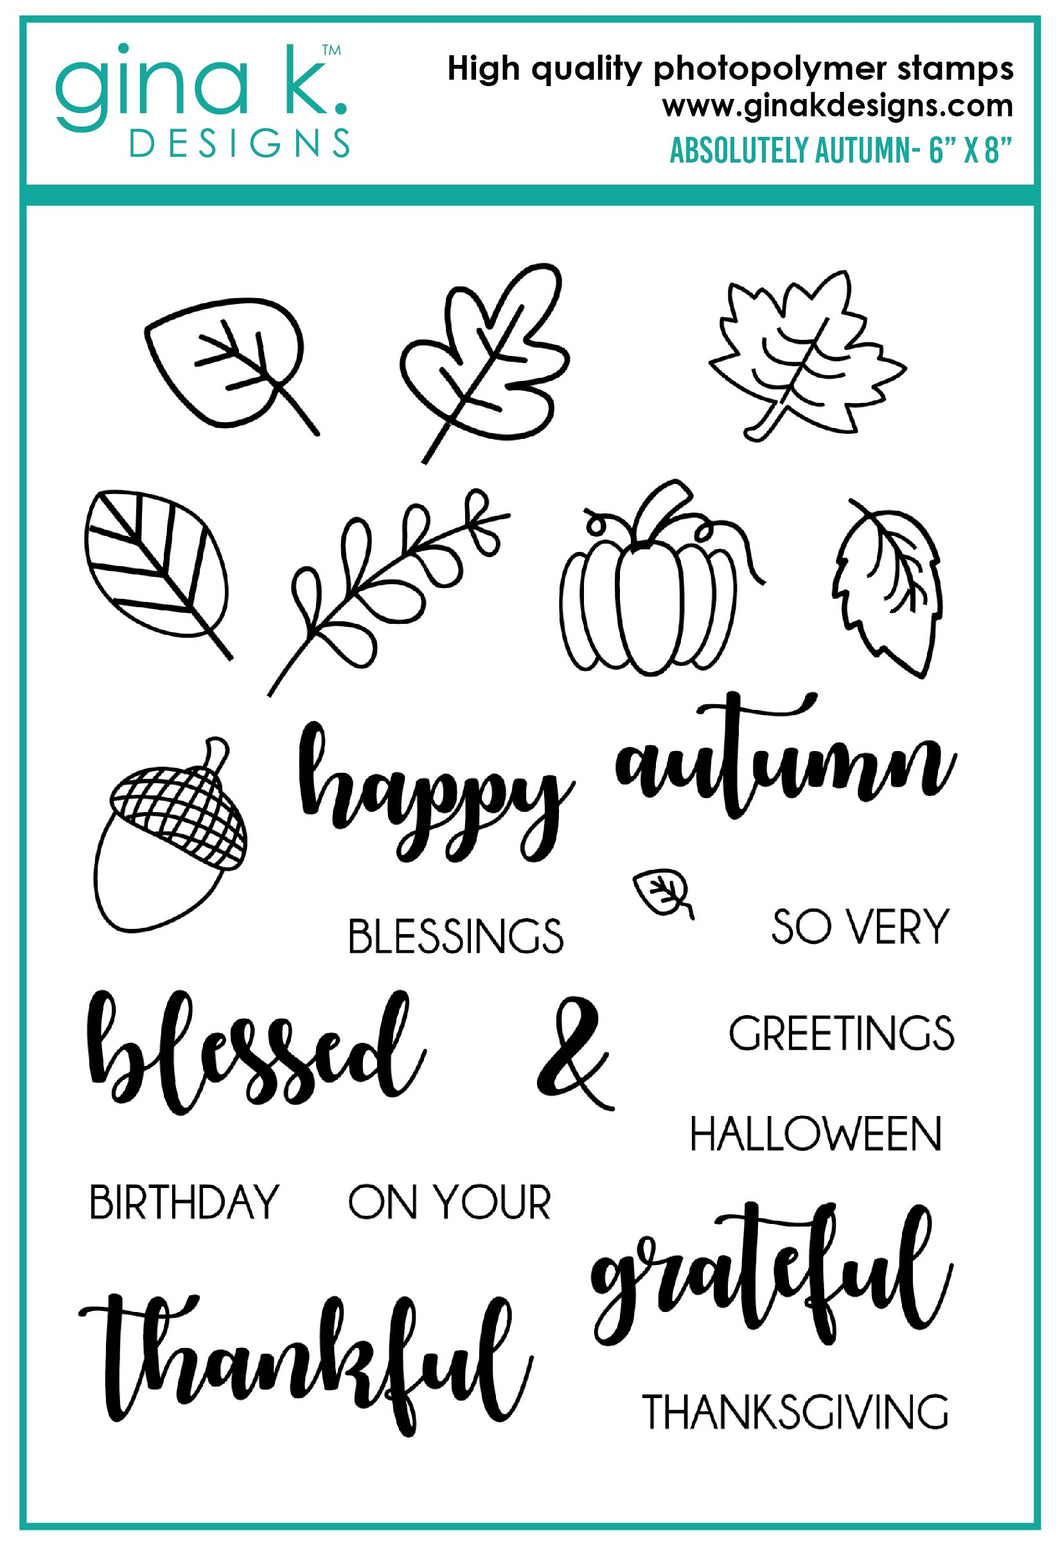 Gina K. Designs - Stamps - Absolutely Autumn. Absolutely Autumn is a stamp set by Beth Silika. This set is made of premium clear photopolymer and measures 6